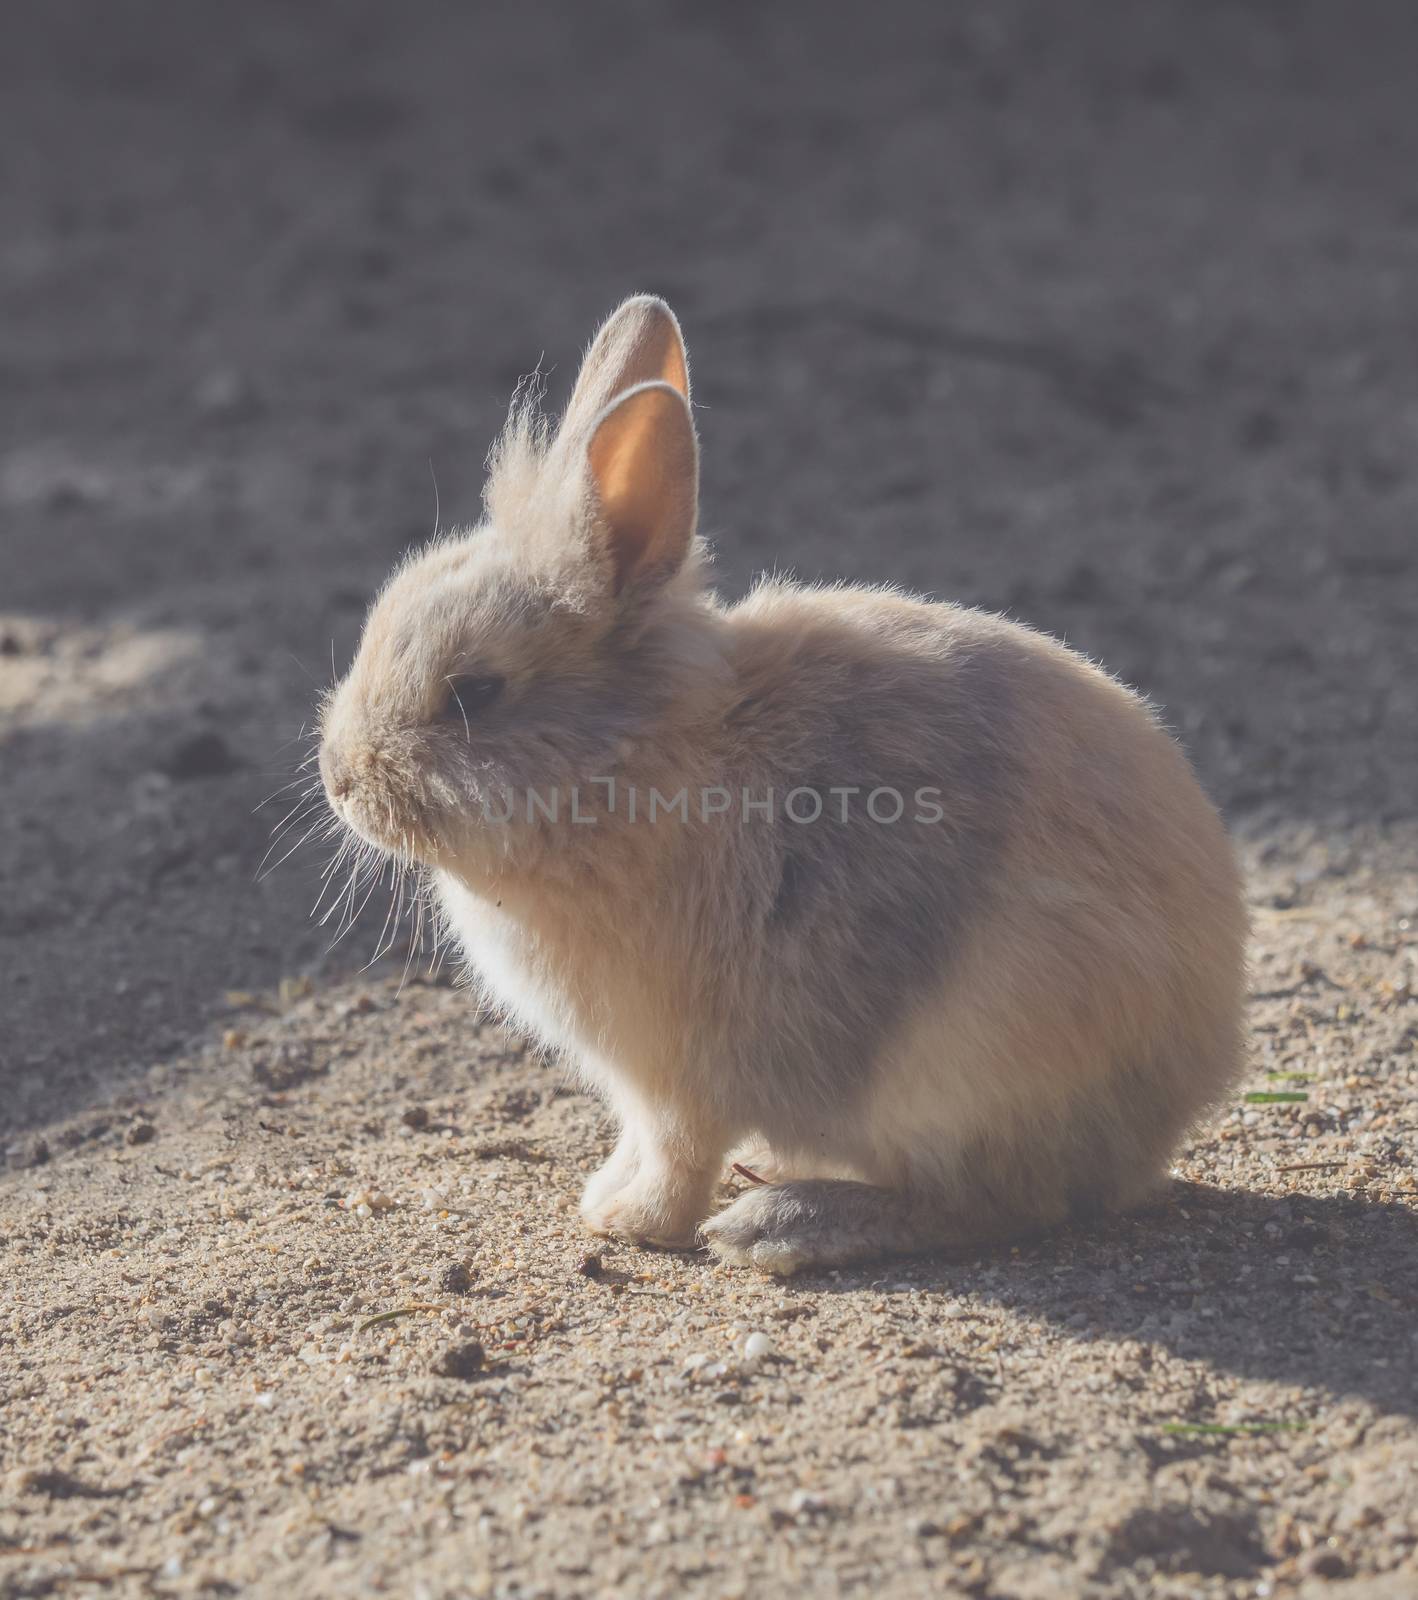 A little bunny is sitting in the sun